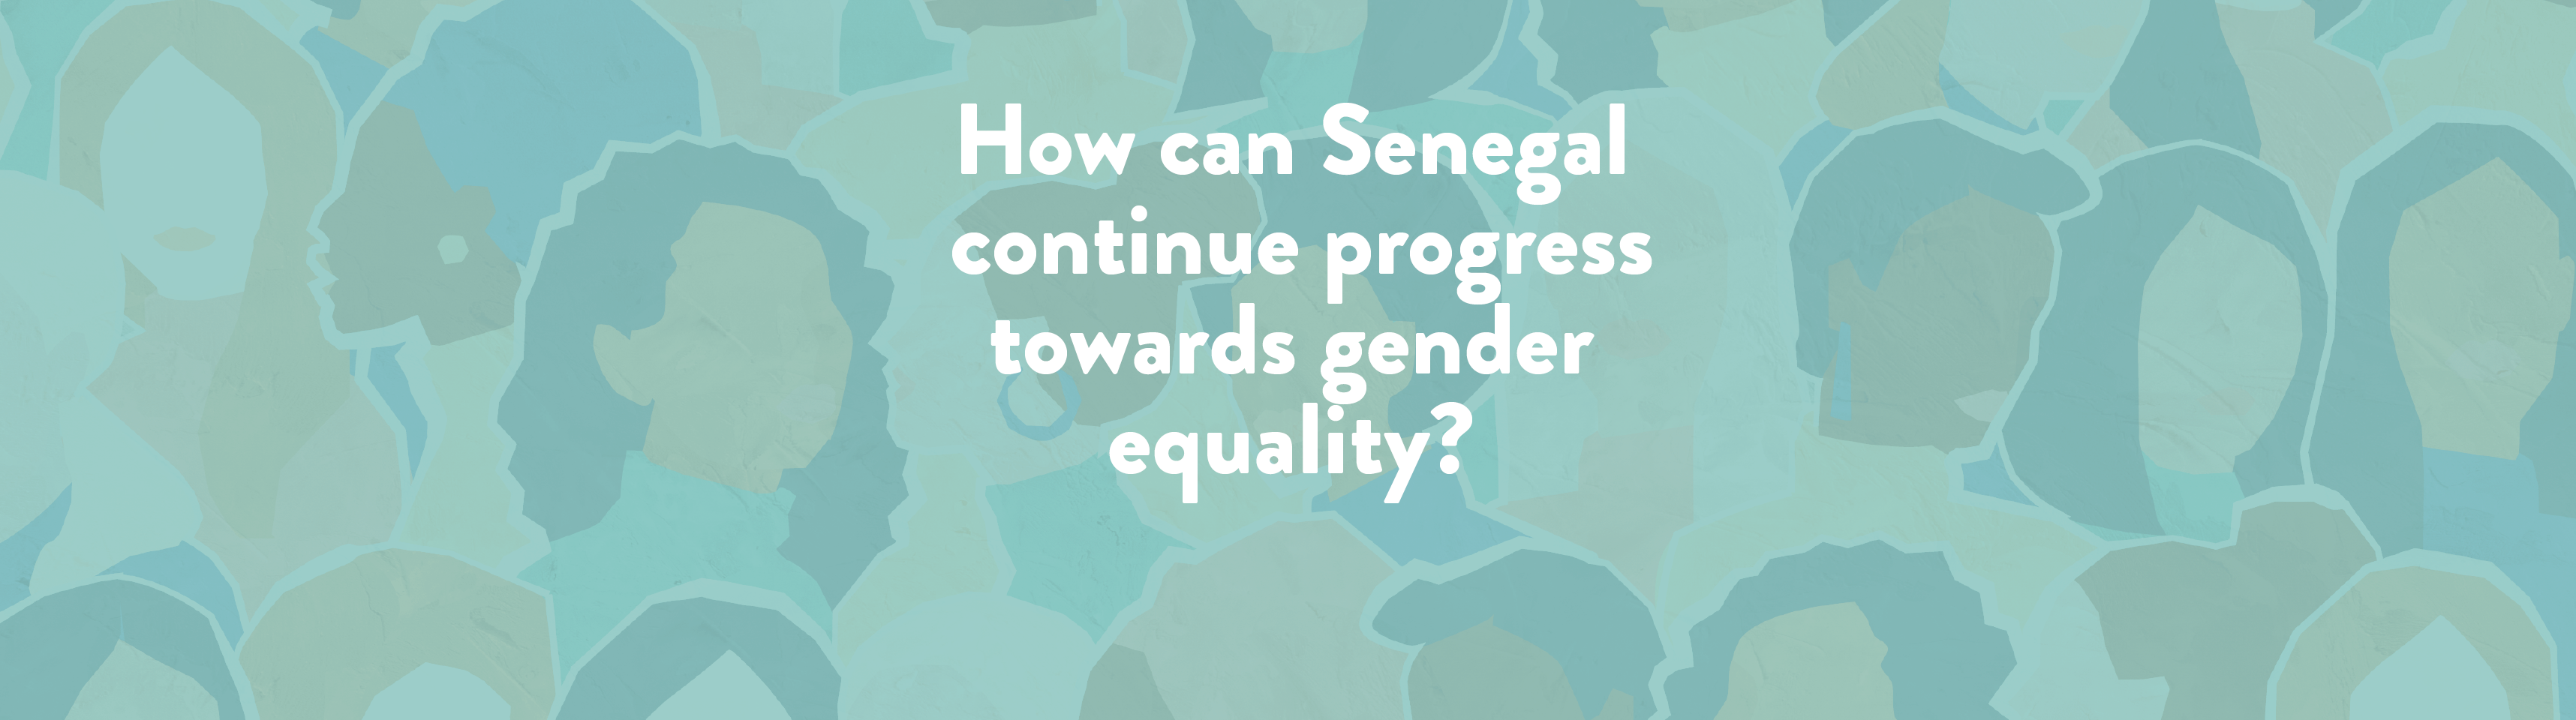 How can Senegal continue progress towards gender equality? 